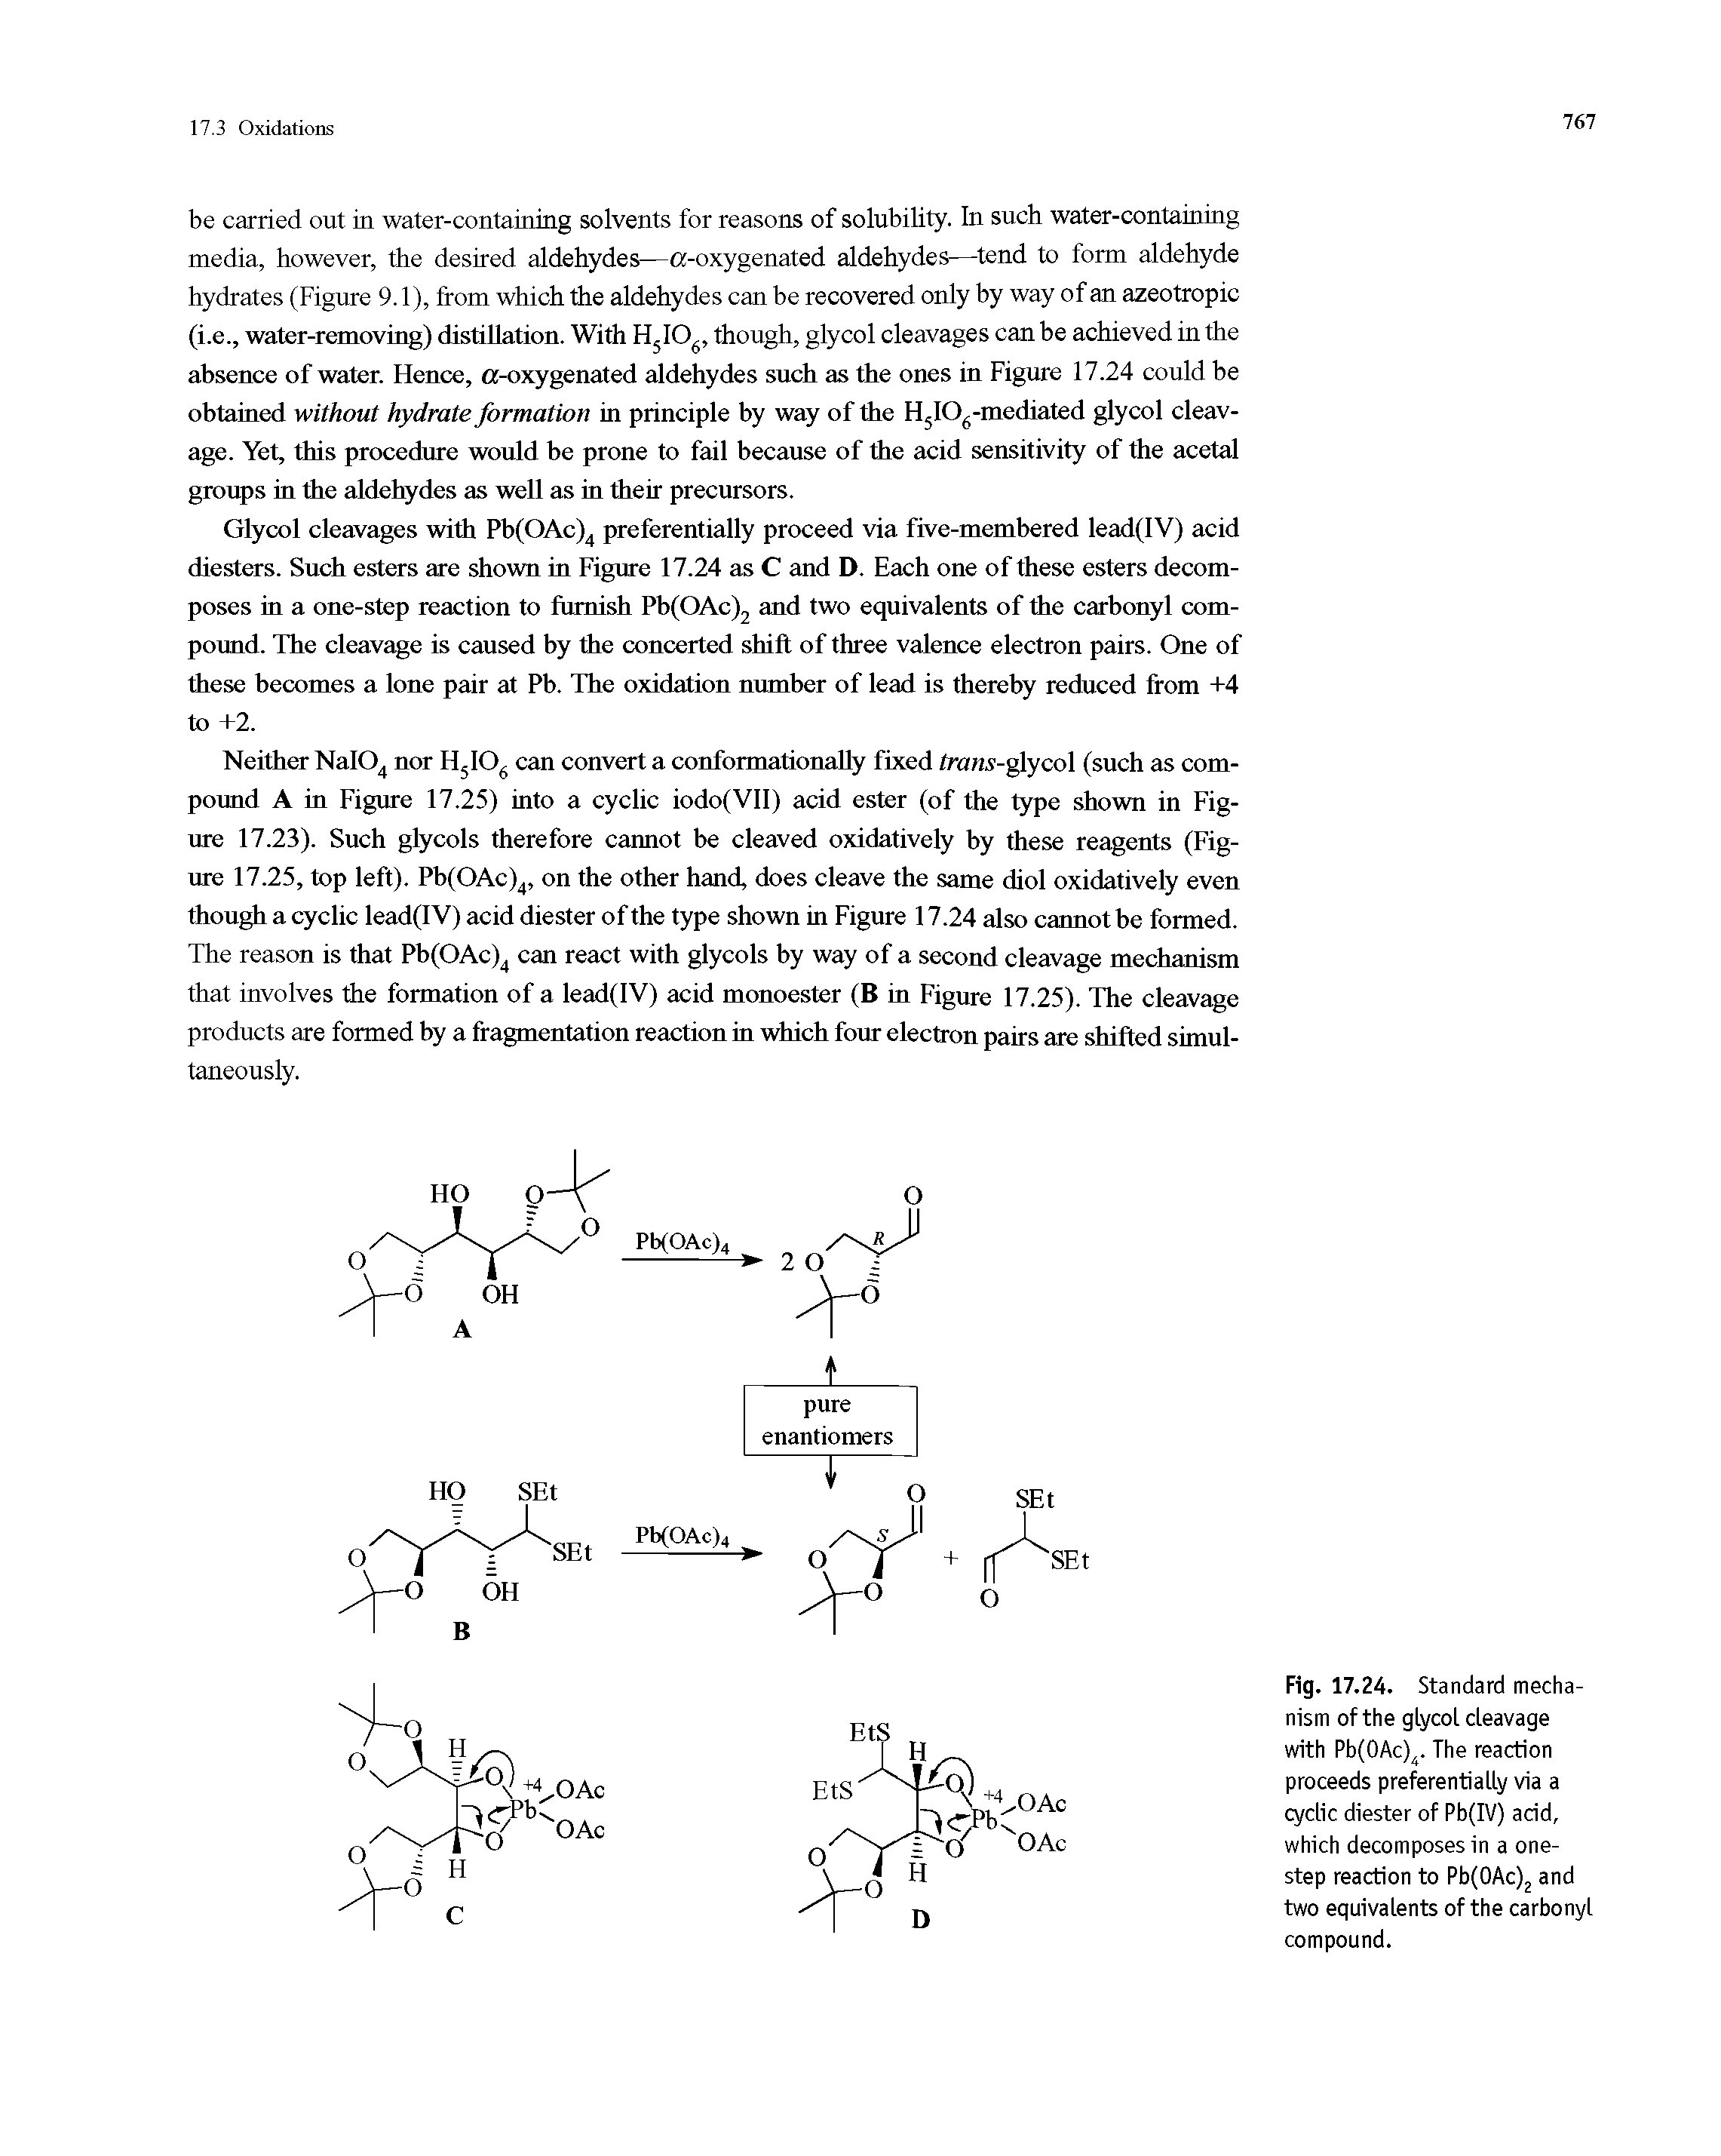 Fig. 17.24. Standard mechanism of the glycol cleavage with Pb(0Ac)4. The reaction proceeds preferentially via a cyclic diester of Pb(IV) acid, which decomposes in a one-step reaction to Pb(0Ac)2 and two equivalents of the carbonyl compound.